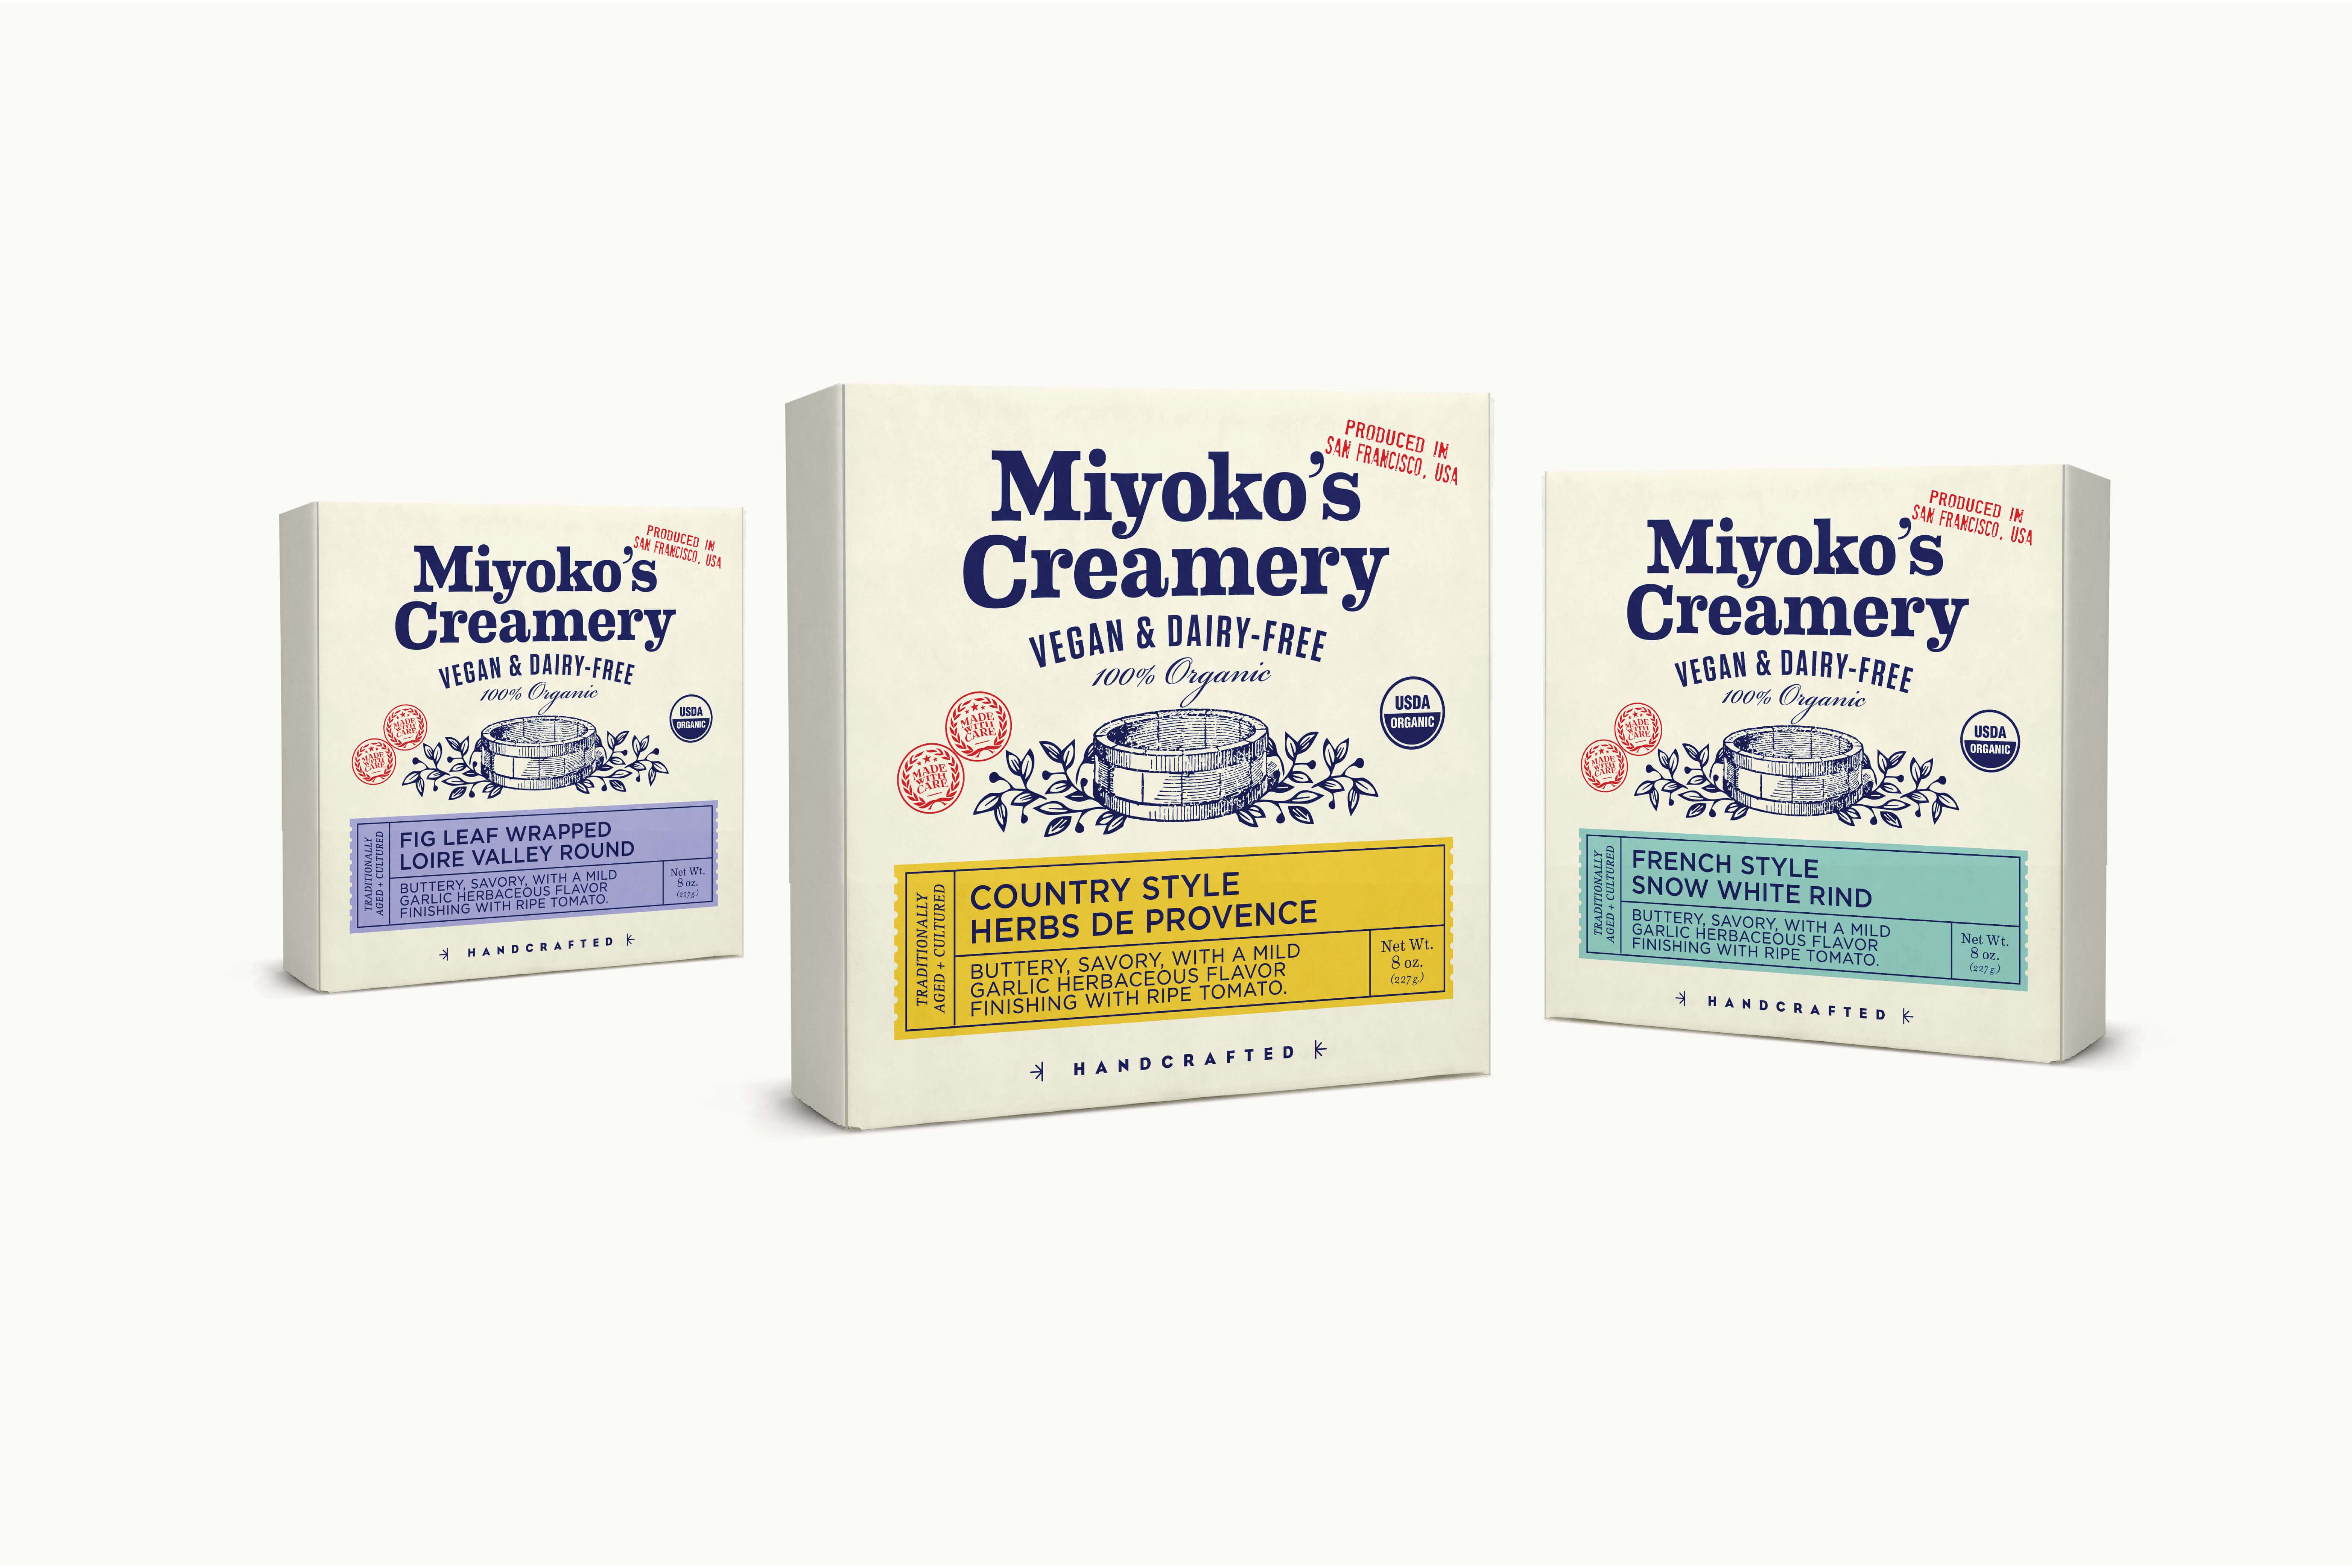 Runner up packaging design concept featuring an old school cheese press. 